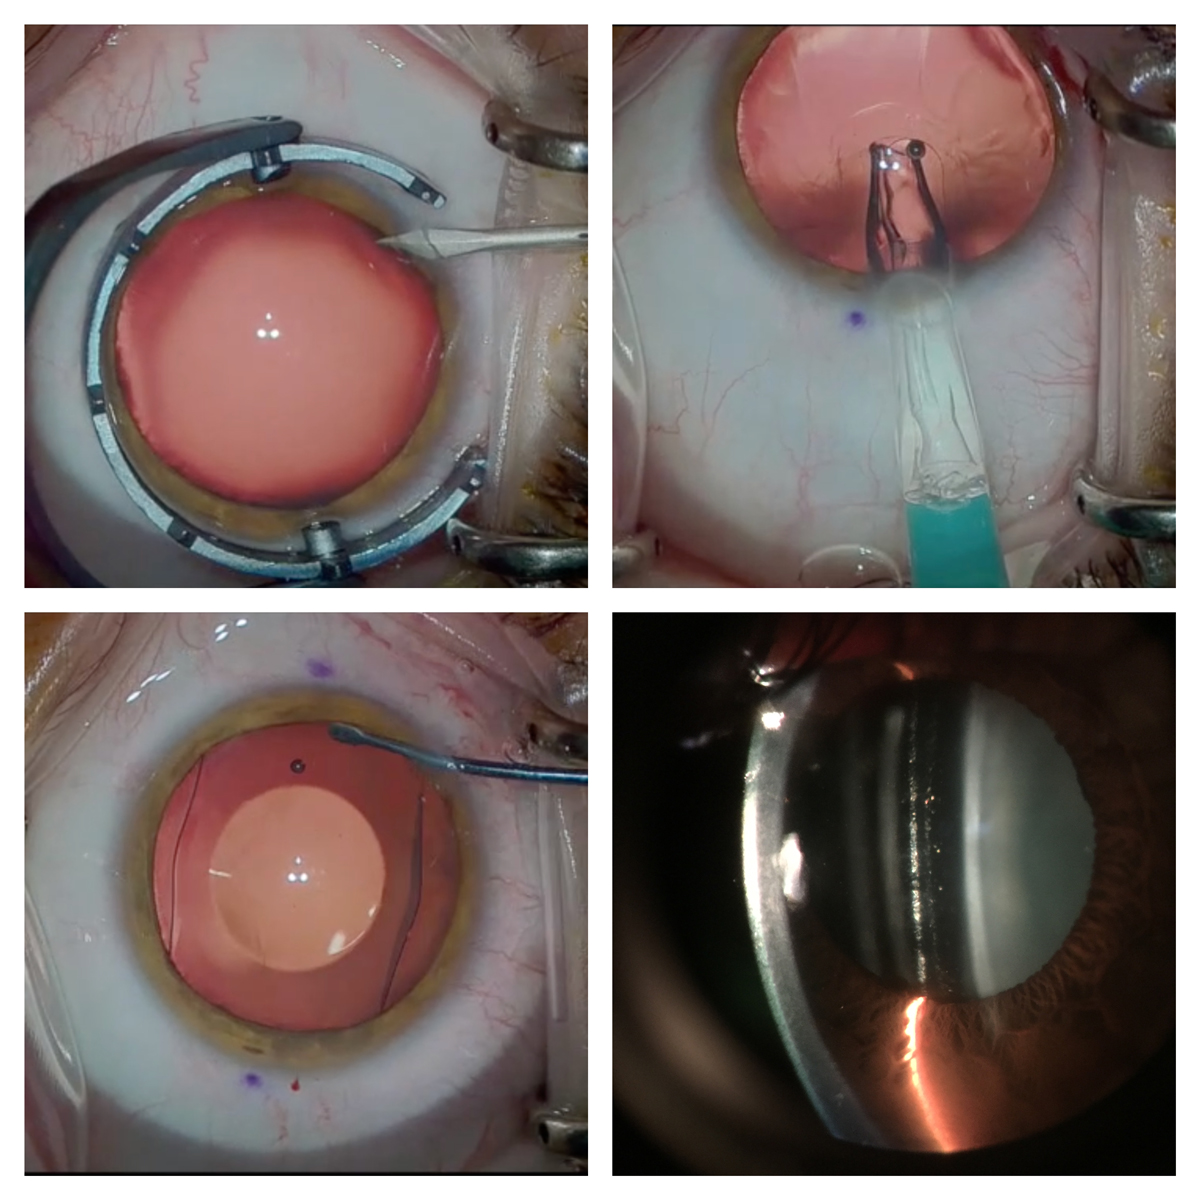 A small opening (top left) is created, and the ICL is inserted into the sulcus (top right) and centered (bottom left). ICL vault over the crystalline lens is evaluated (bottom right).